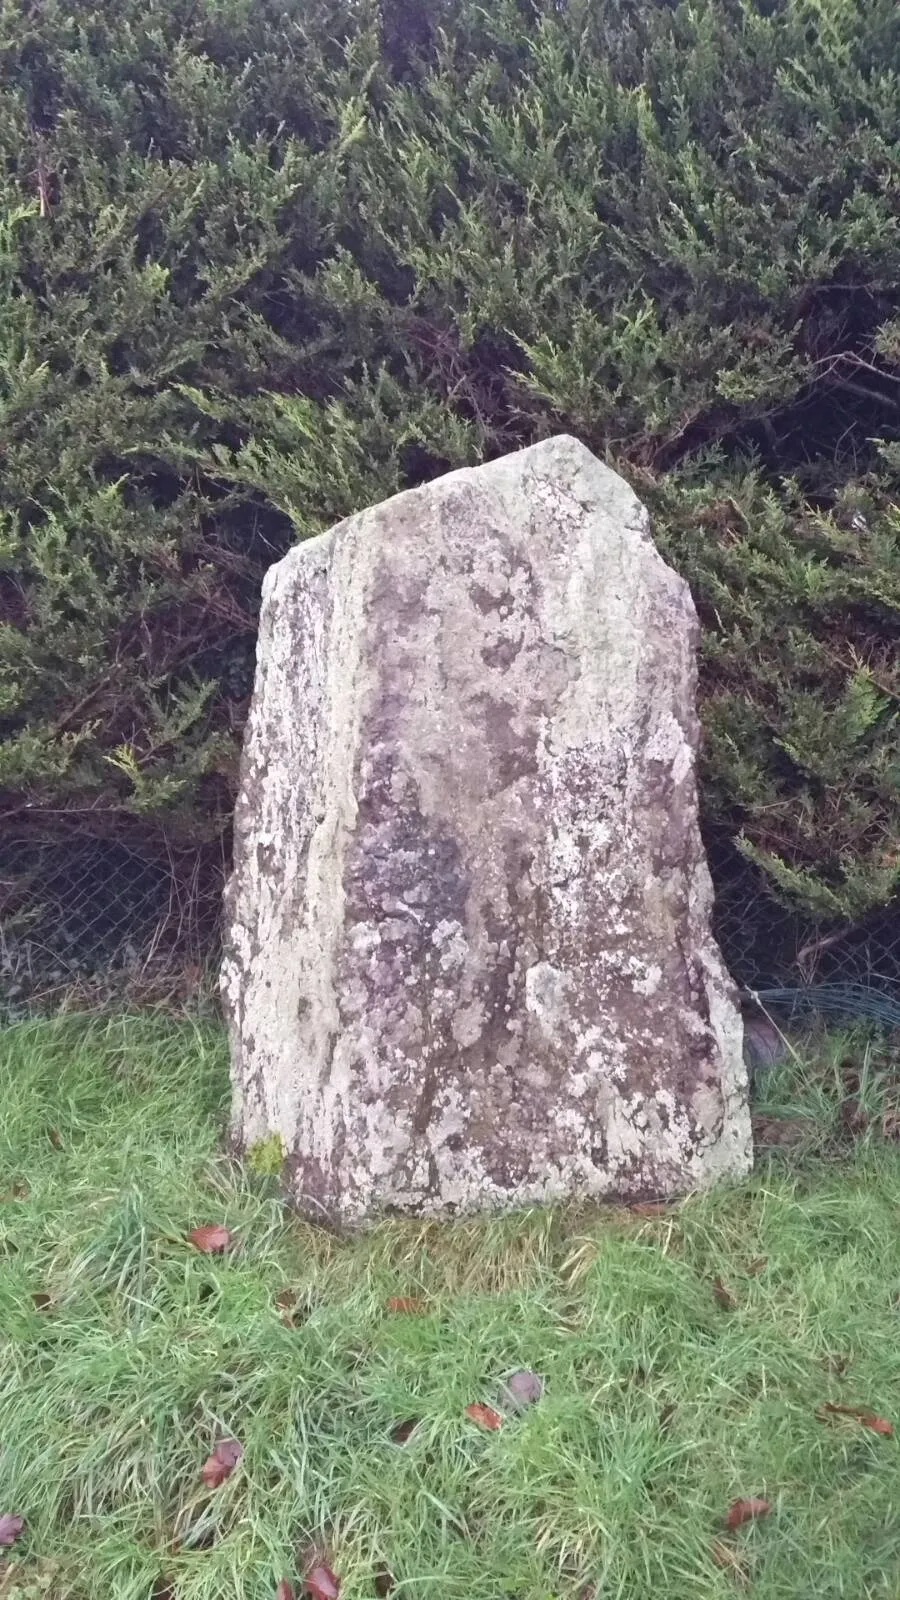 Photo showing: This standing stone is located in the pitch behind the community centre, though some older maps appear to show it in the back garden of a neighbouring house. It is easily accessible from the road and visible from the rear car-park of the community centre.
The stone's National Monuments Service database ID is CO09022. The NMS coordinates given are: Lat:51.967043, Long:-8.645151